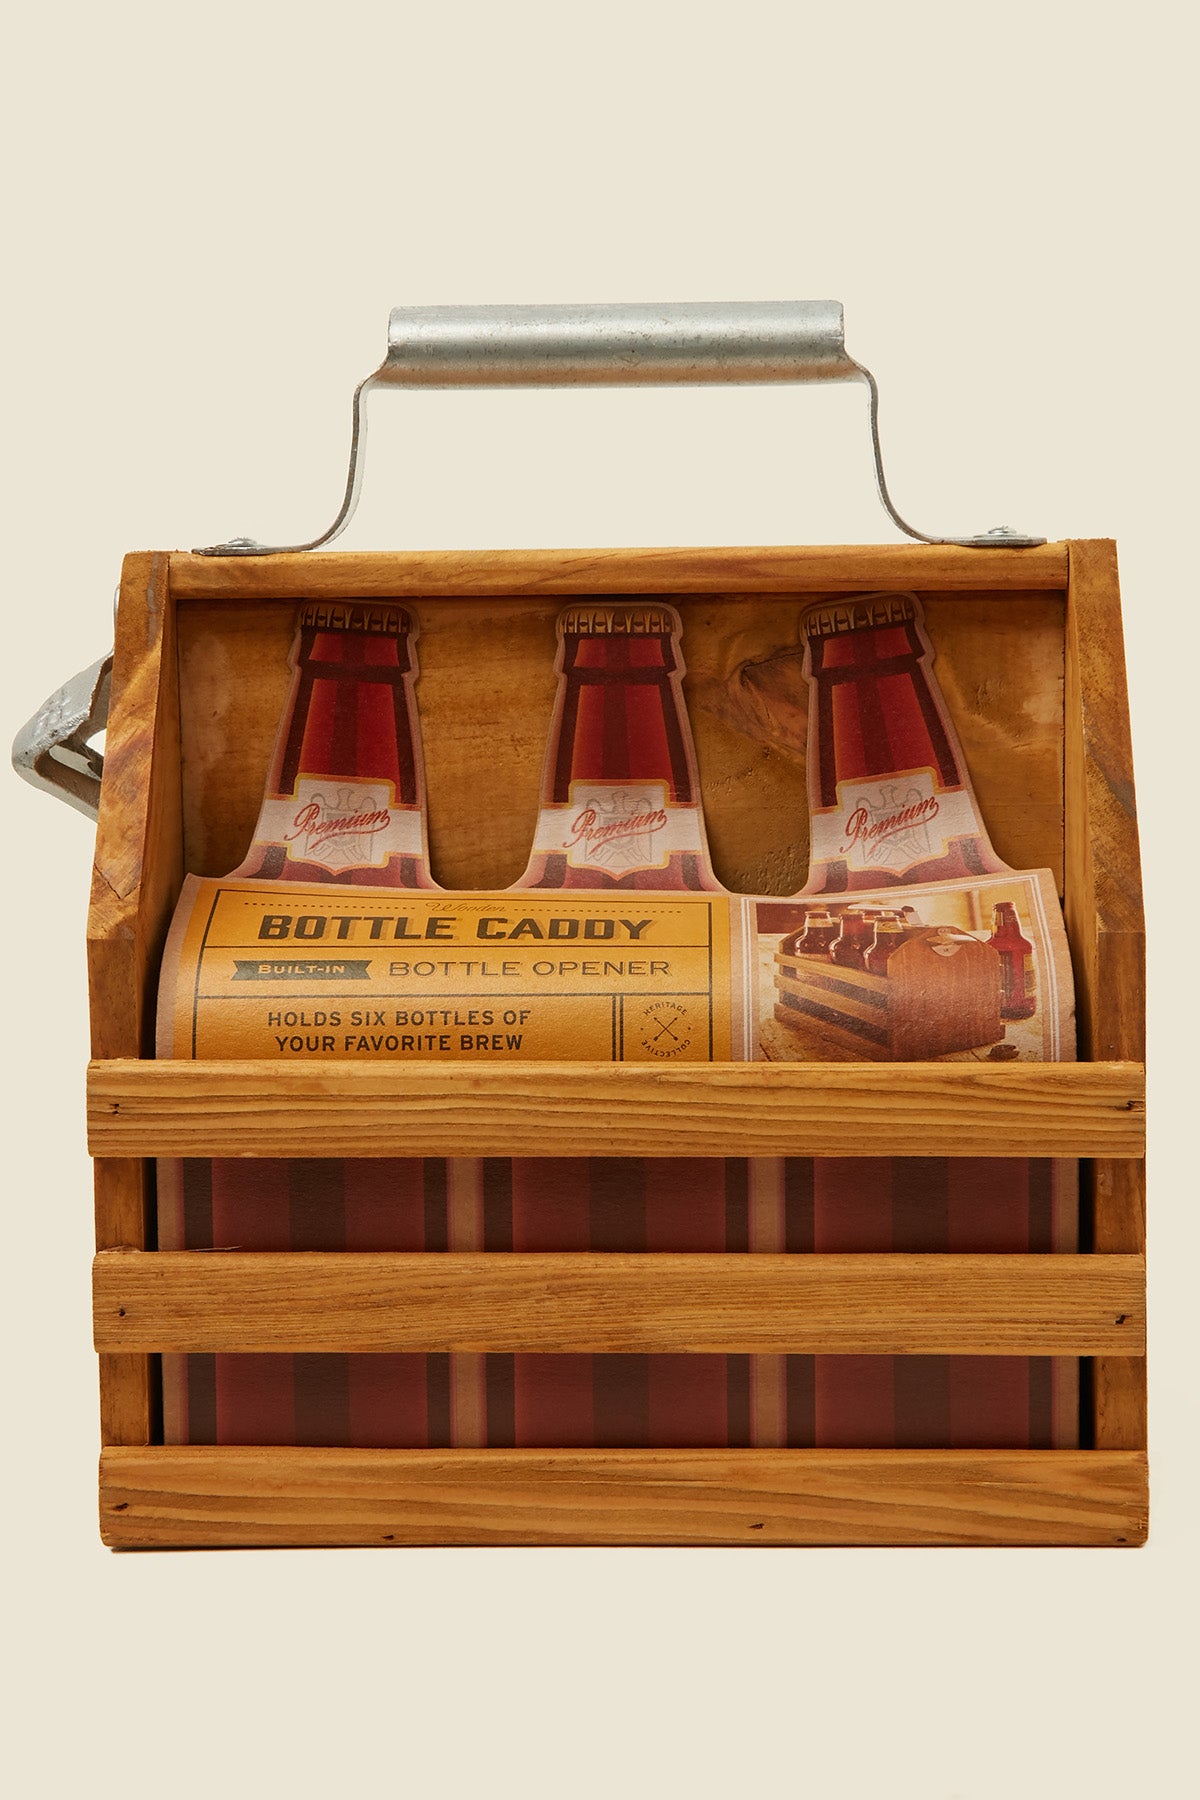 Refinery And Co Wood Bottle Caddy With Opener